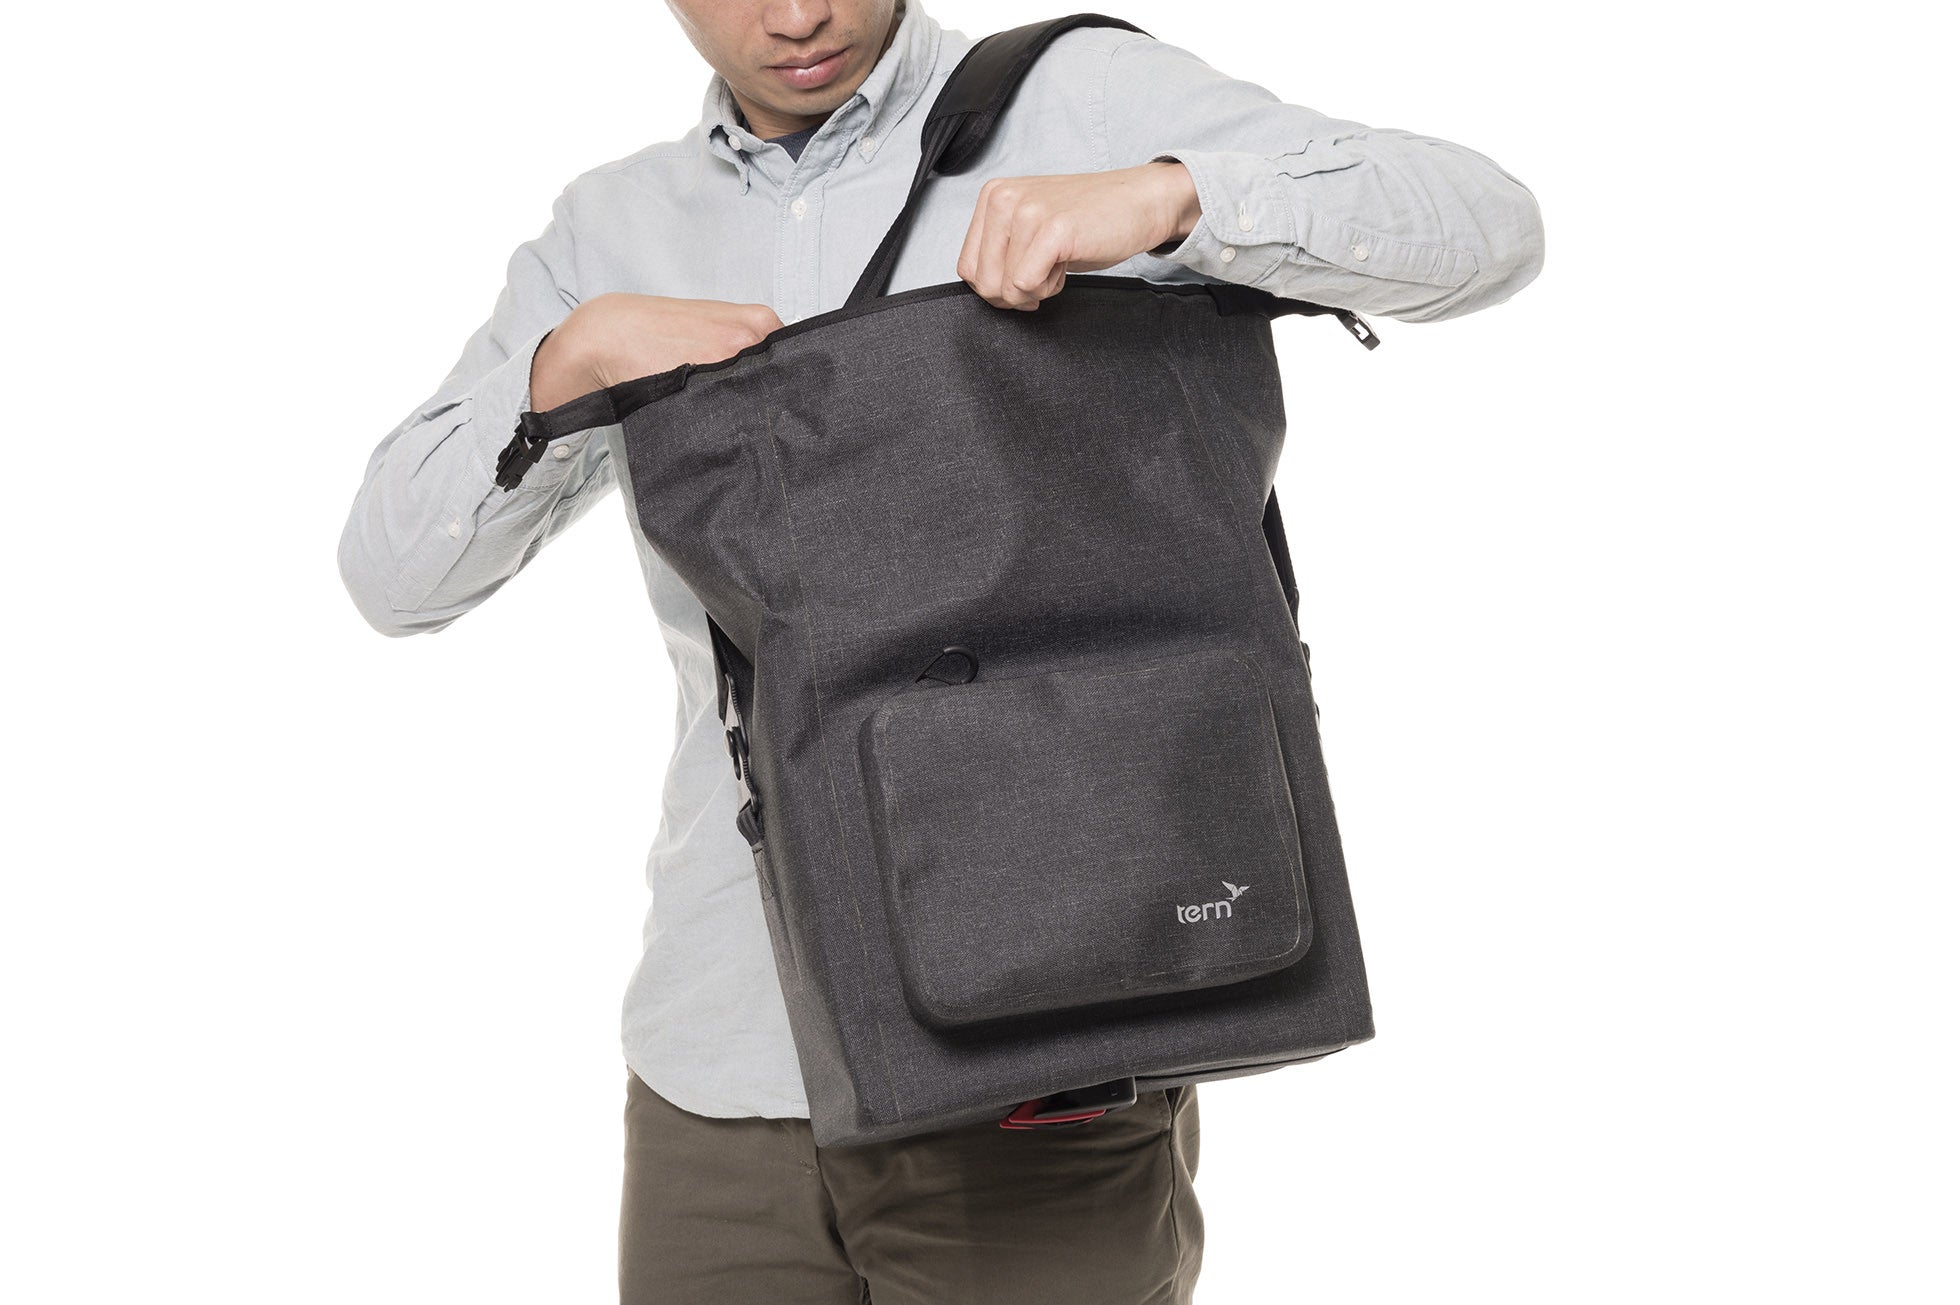 Tern Dry Goods Bag is with comfortable messenger strap and soft sidewalls